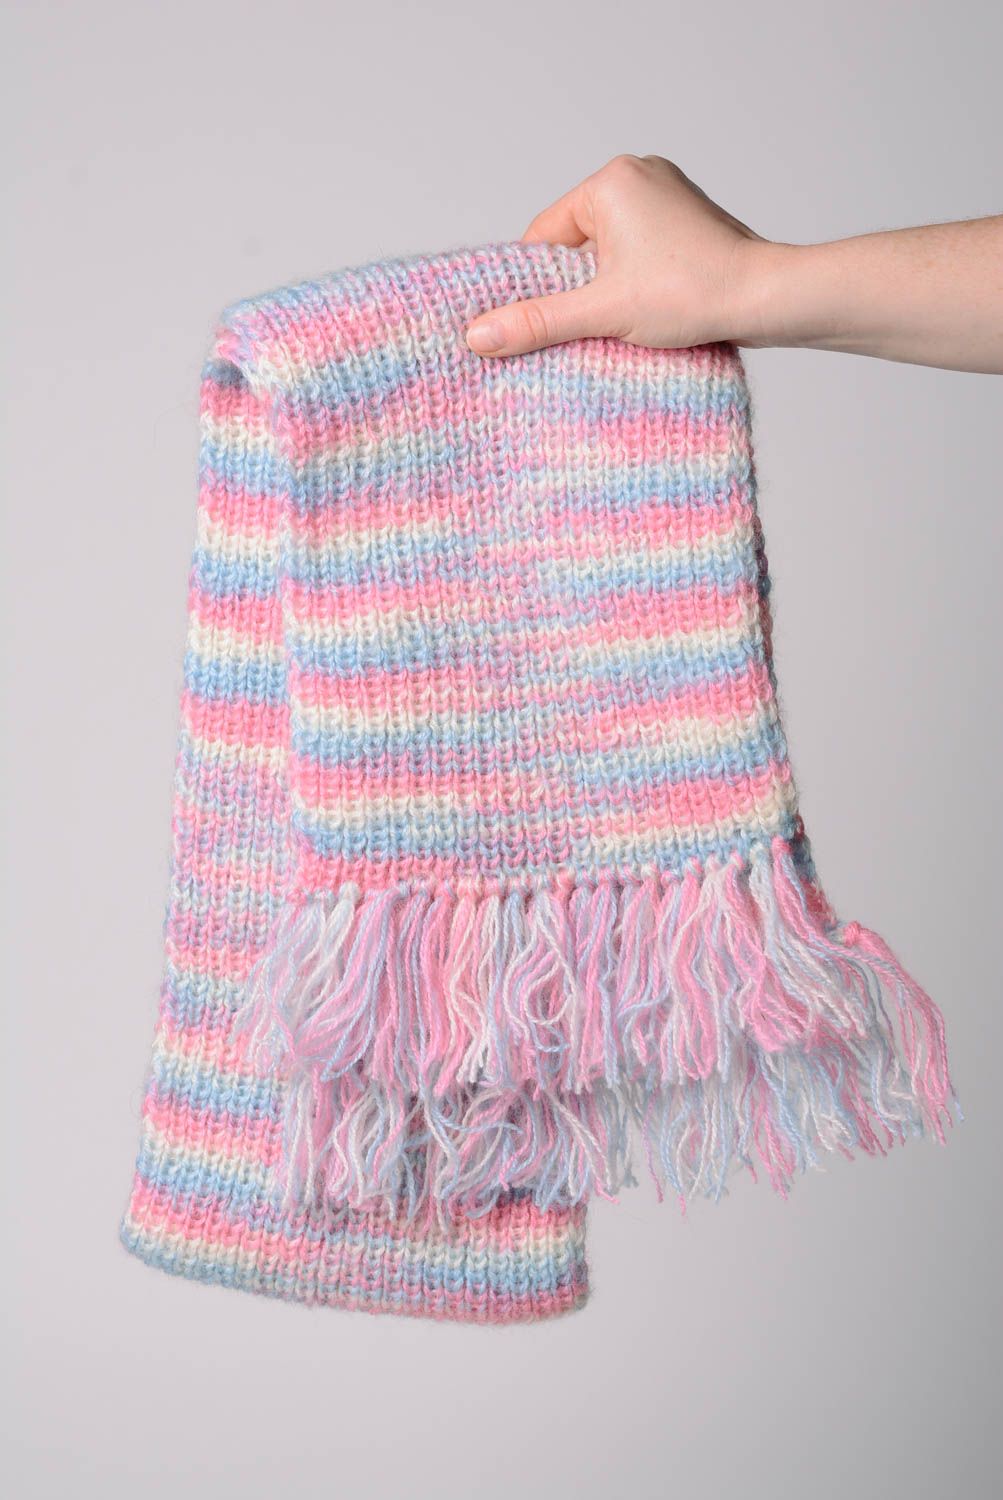 Set of handmade designer warm pink knitted accessories scarf and hat for women photo 5